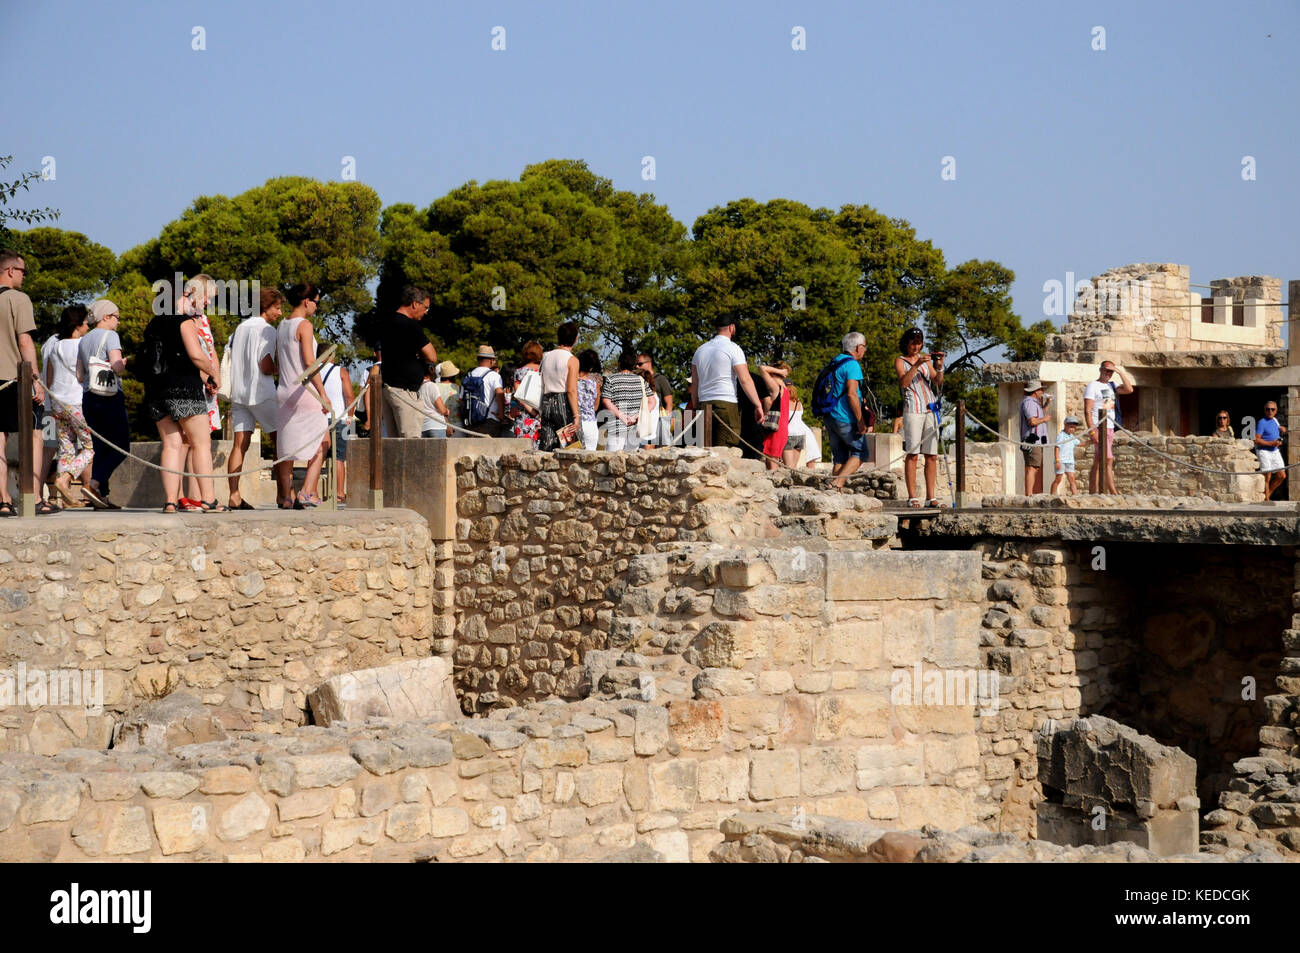 Visitors, many from tours and cruise ships, crowd into the Palace at Knossos on the Island of Crete. Interested in history or just a site to tick off? Stock Photo